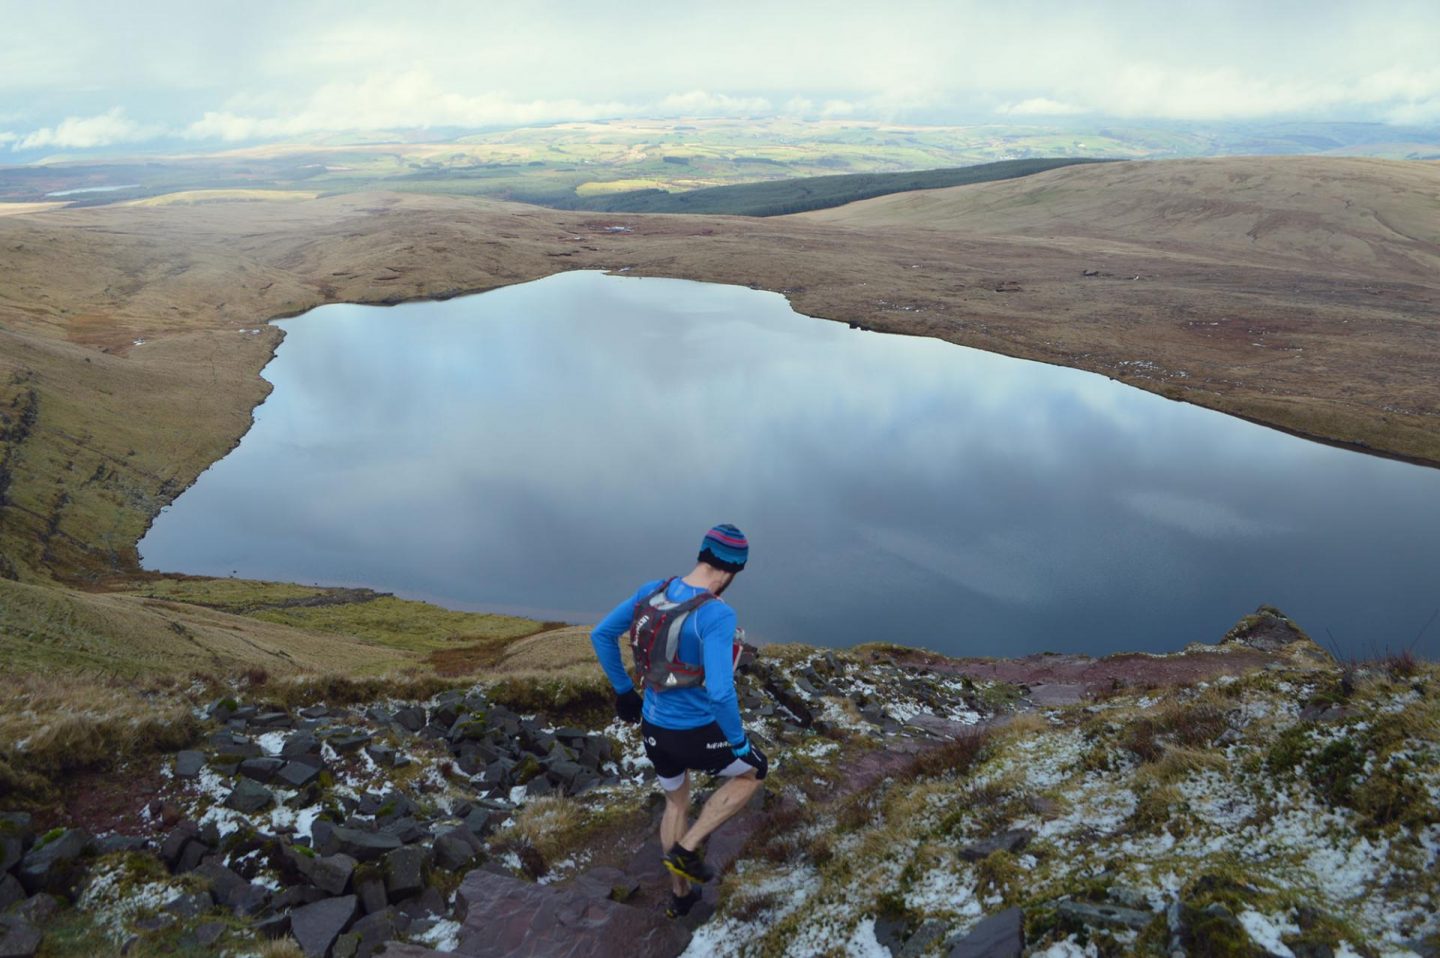 Trail Running For Beginners | How To Start Trail Running The Girl Outdoors Sian Lewis